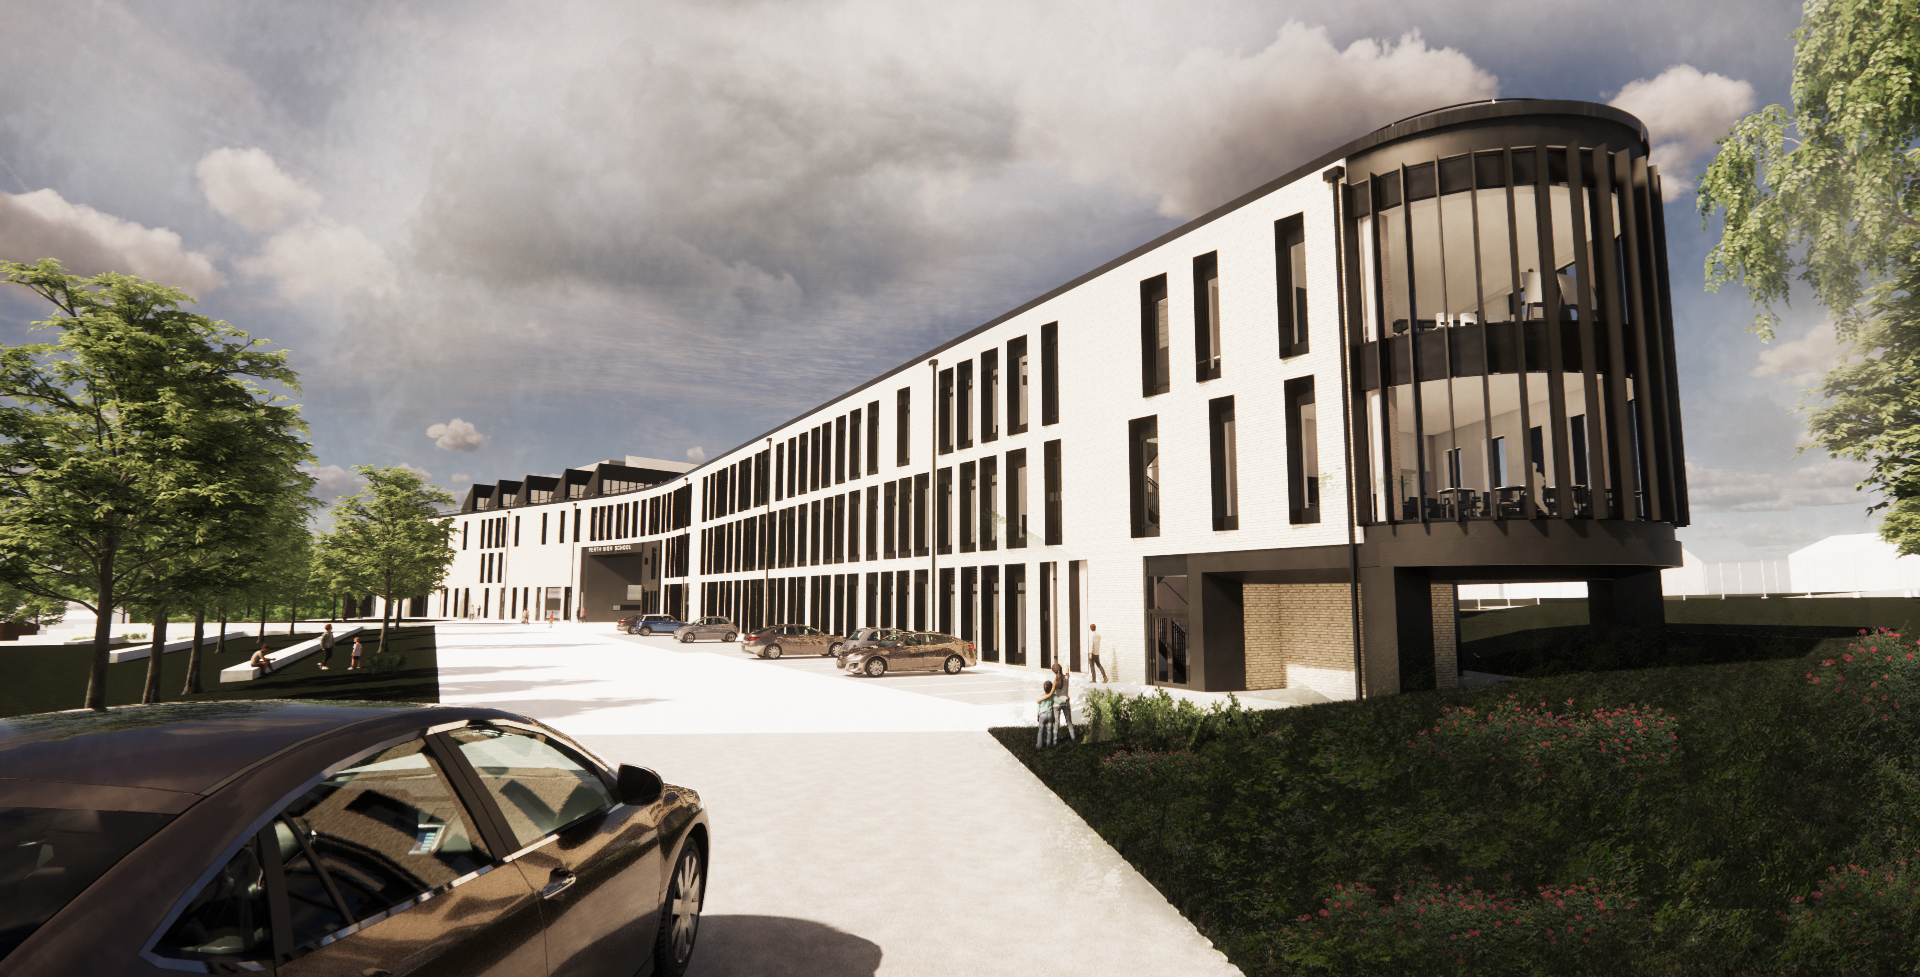 In Pictures: First look at Passivhaus-designed Perth High School